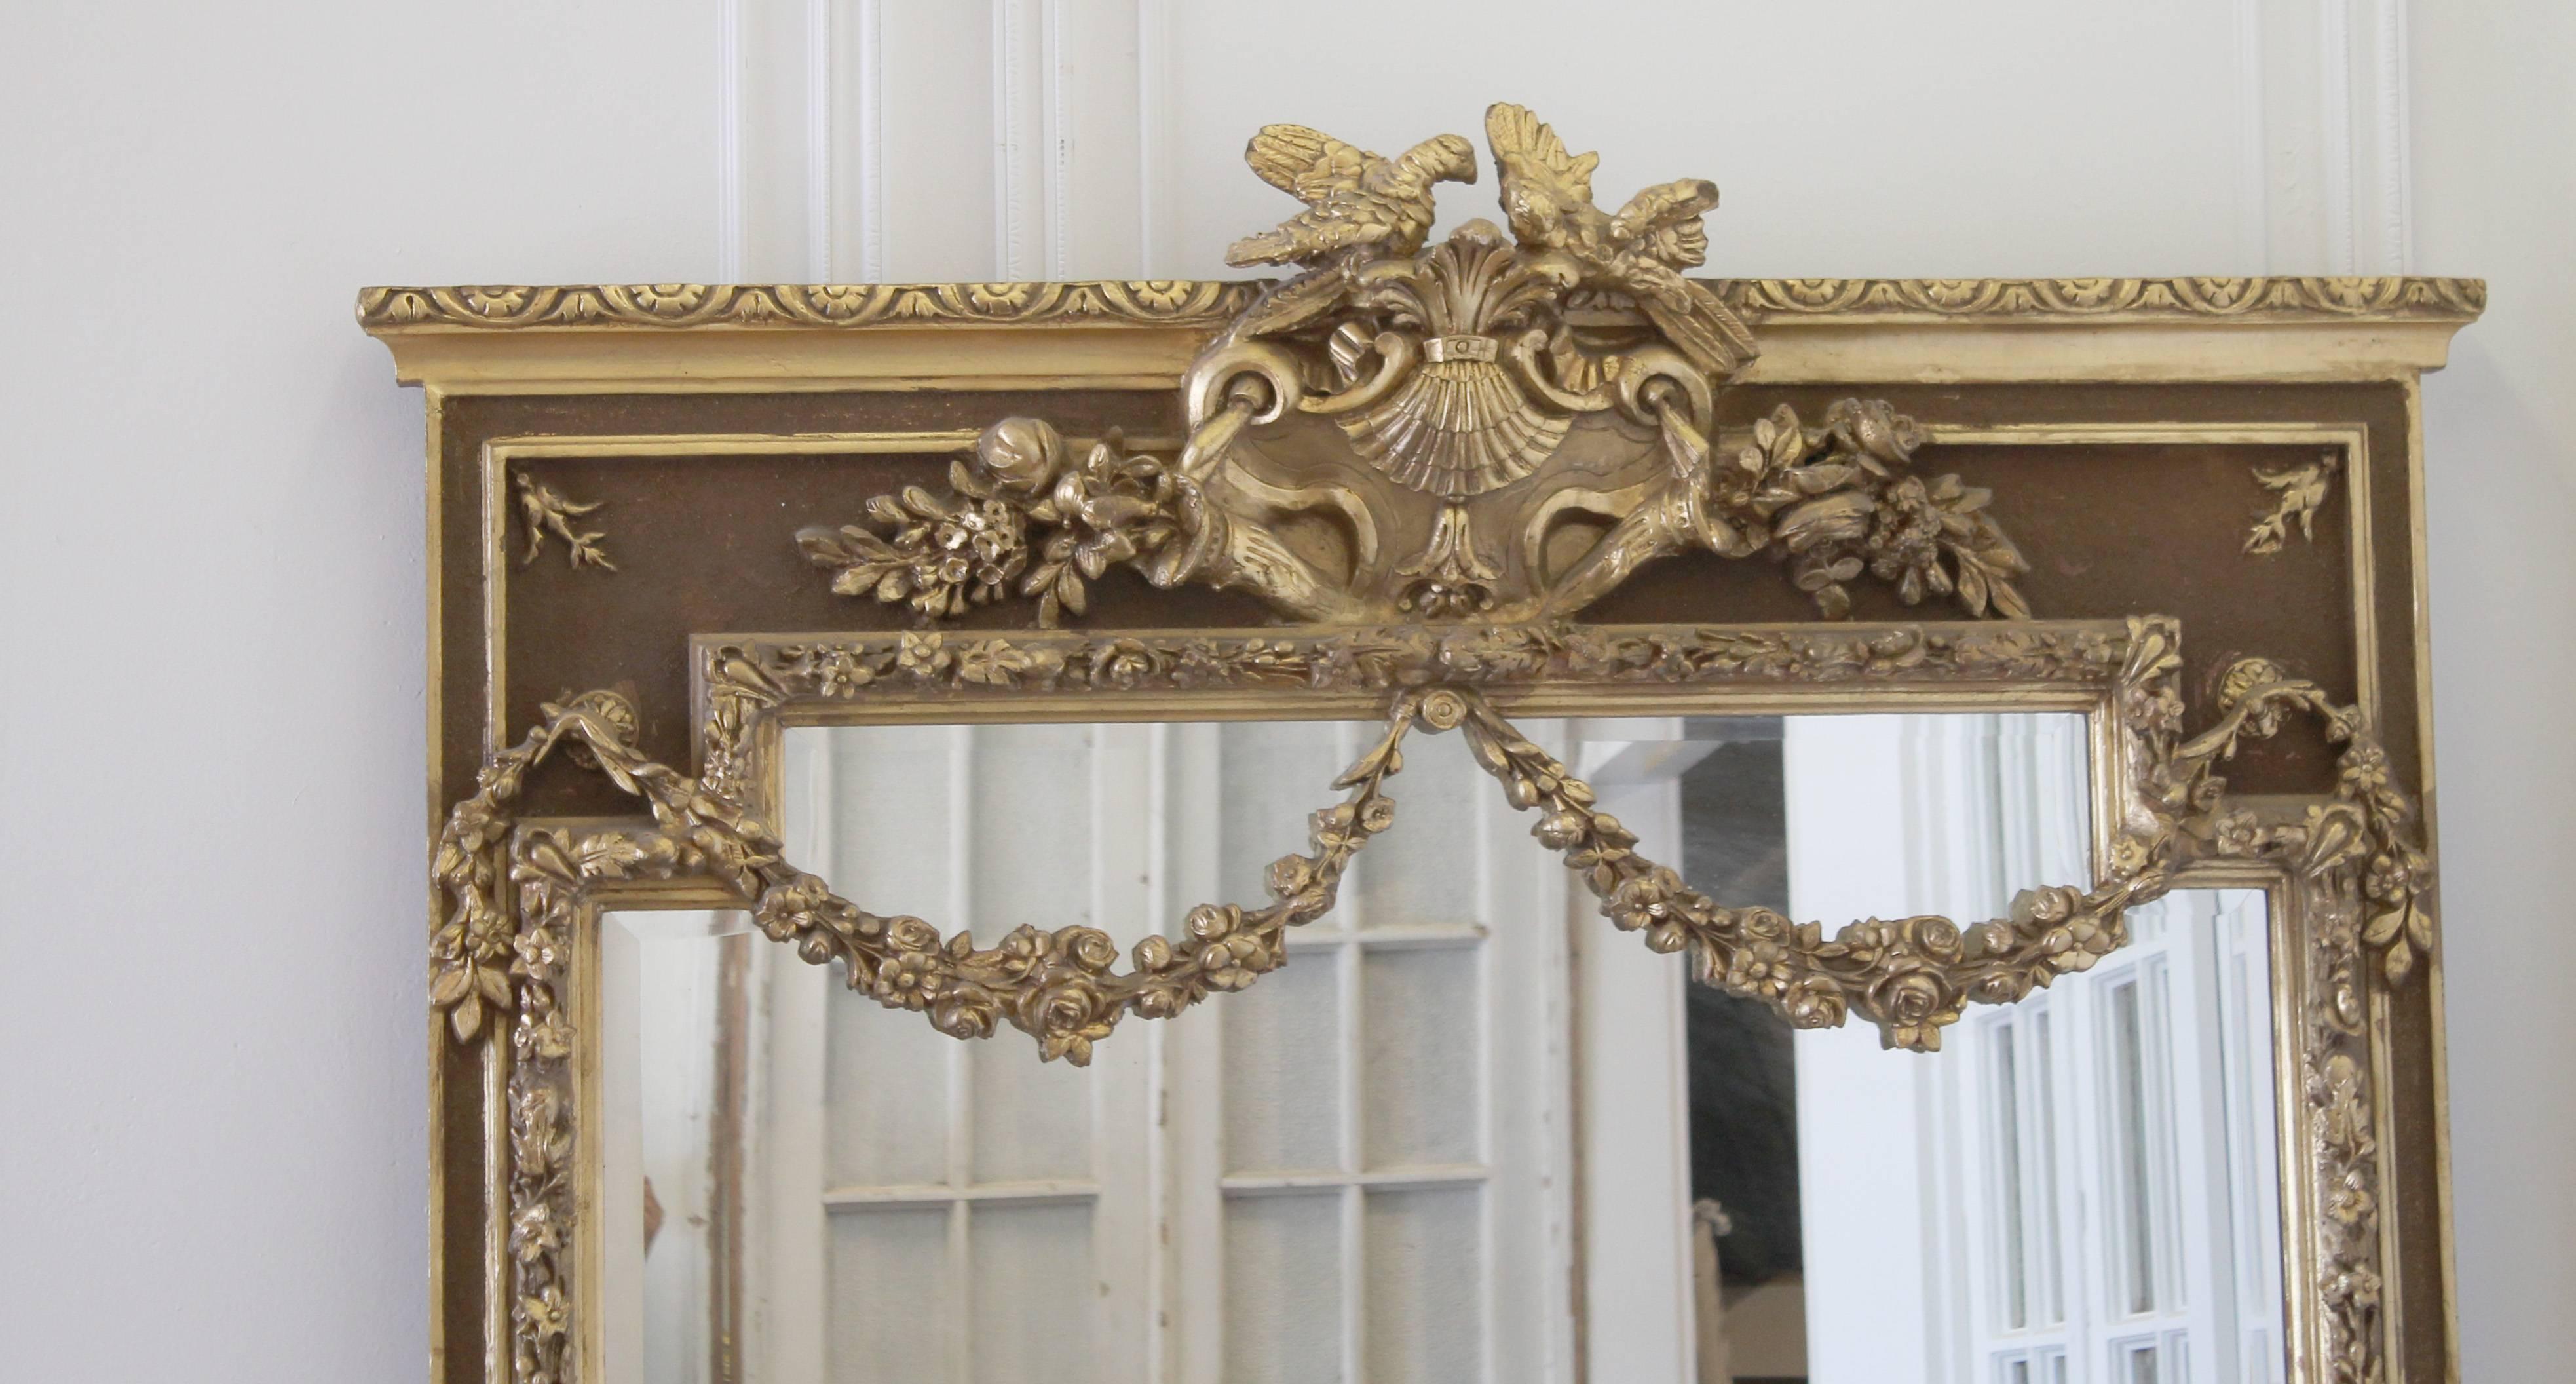 Fabulous wall mirror with carved roses and dove details. Finished in a bronze, and gilt with subtle patina. Beautiful large rose swags down over the top of the mirror, with trailing floral vines cascading down each side.
Wood and gesso carvings,